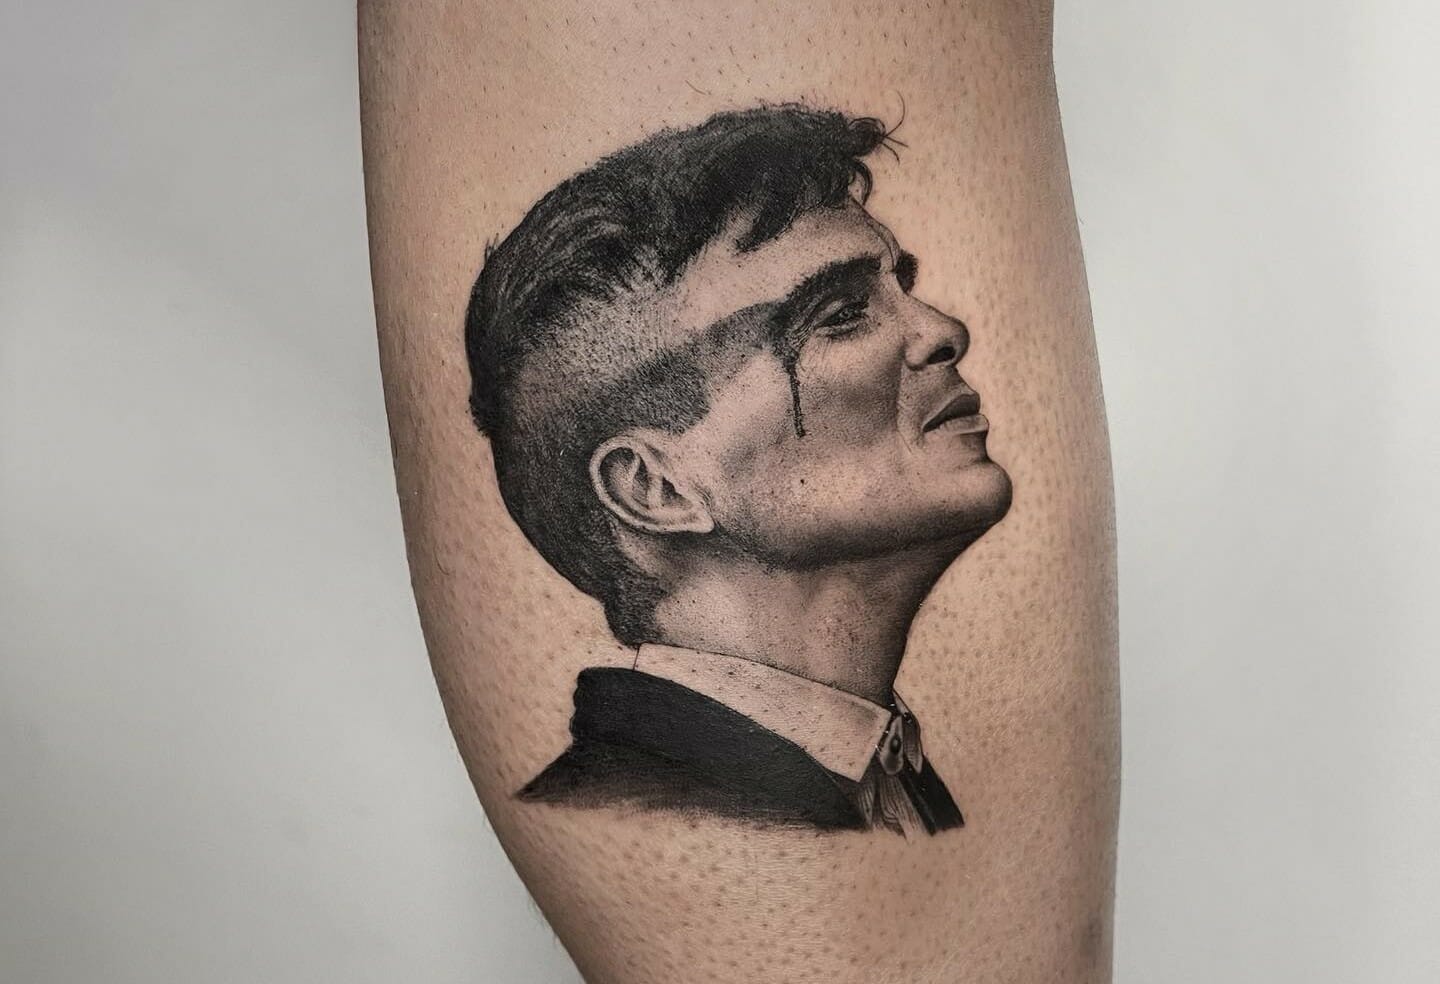 Peaky Blinders: What Tommy Shelby's Chest Tattoo Means